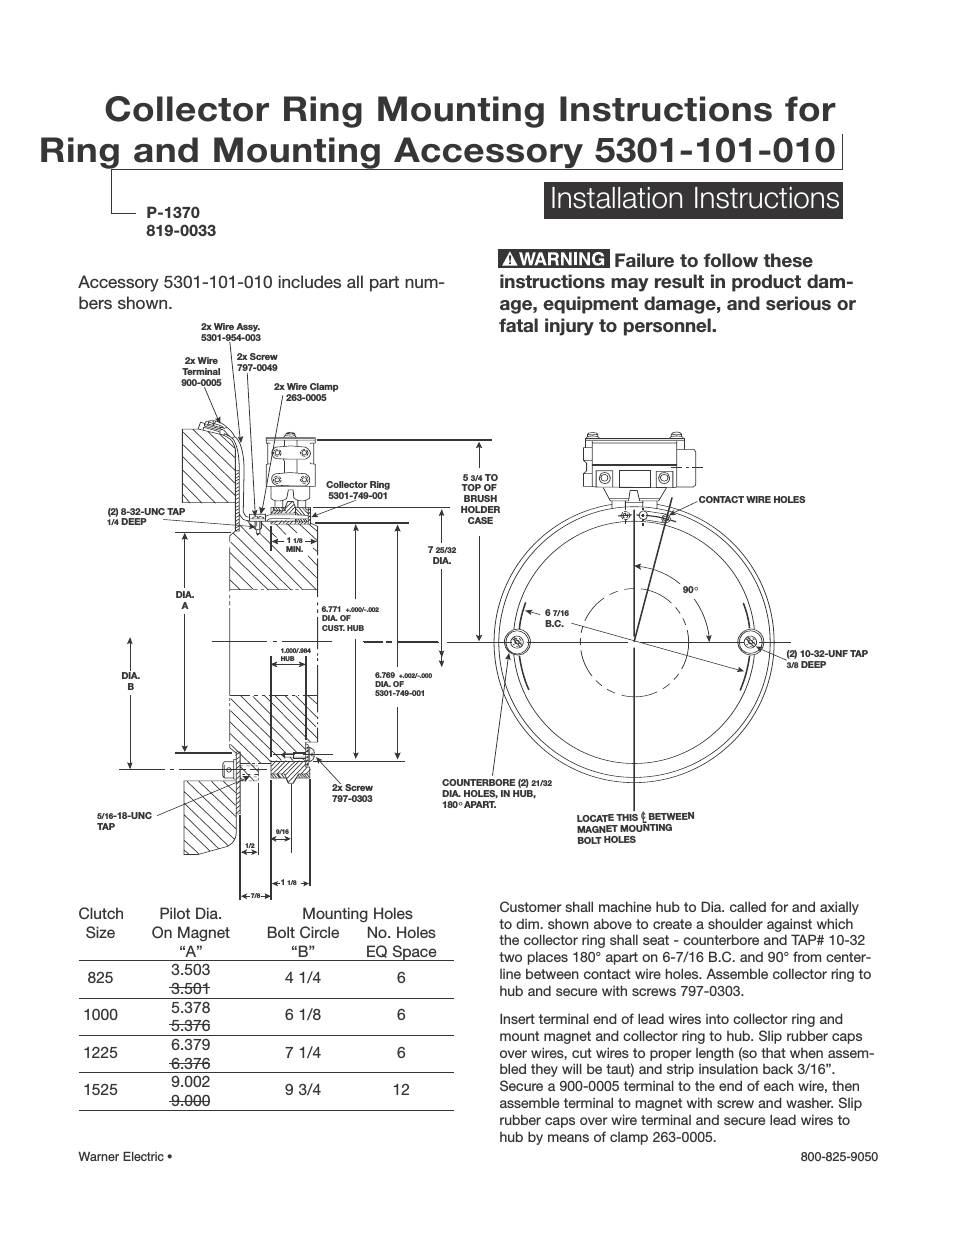 5301-101-010 Collector Ring